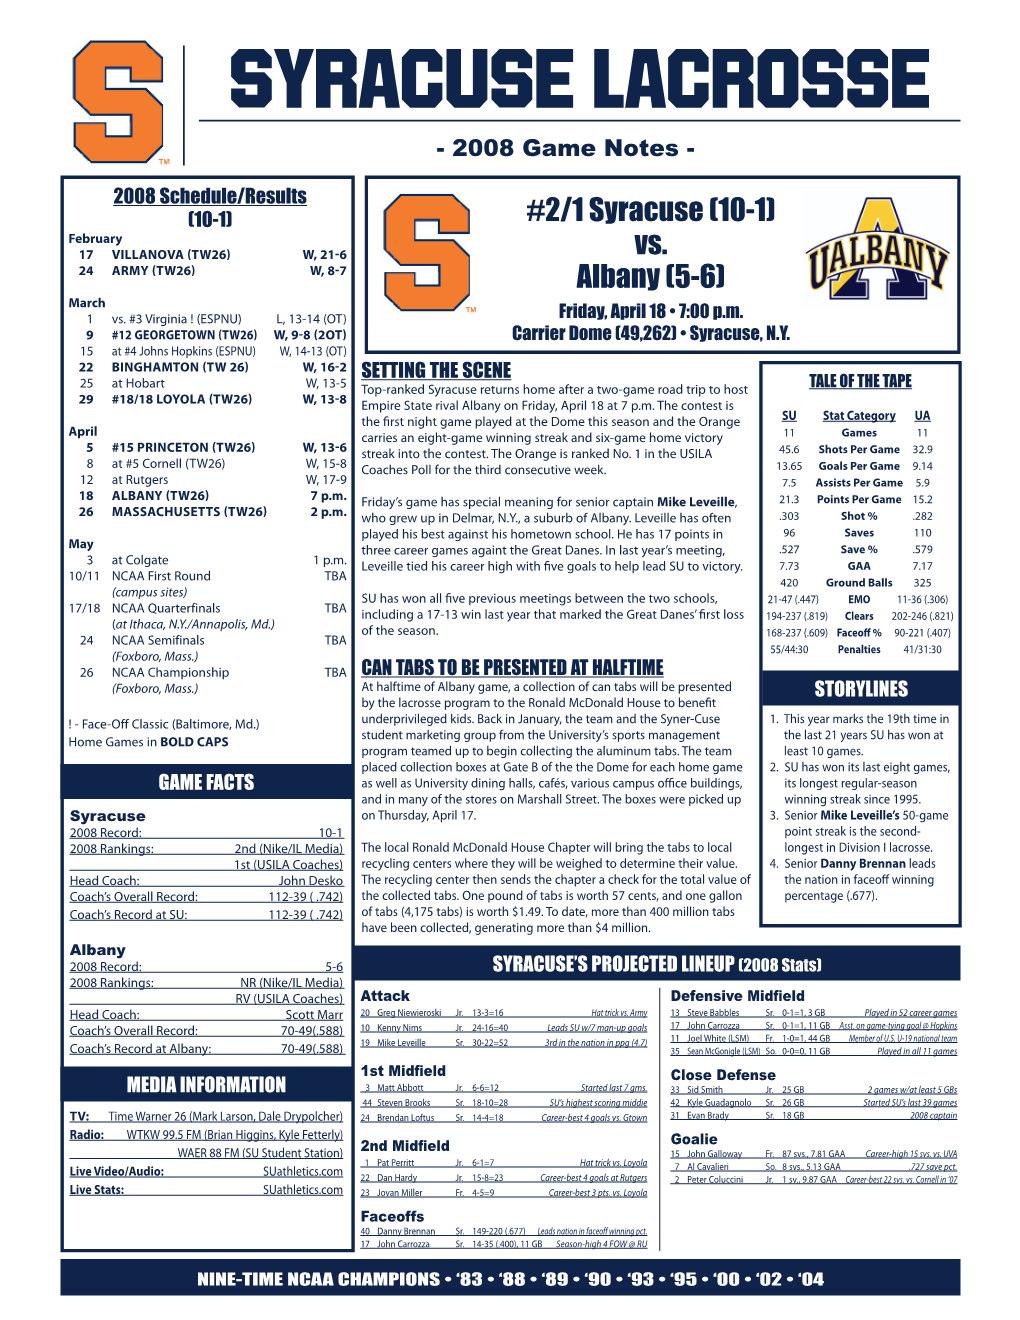 Syracuse Lacrosse - 2008 Game Notes